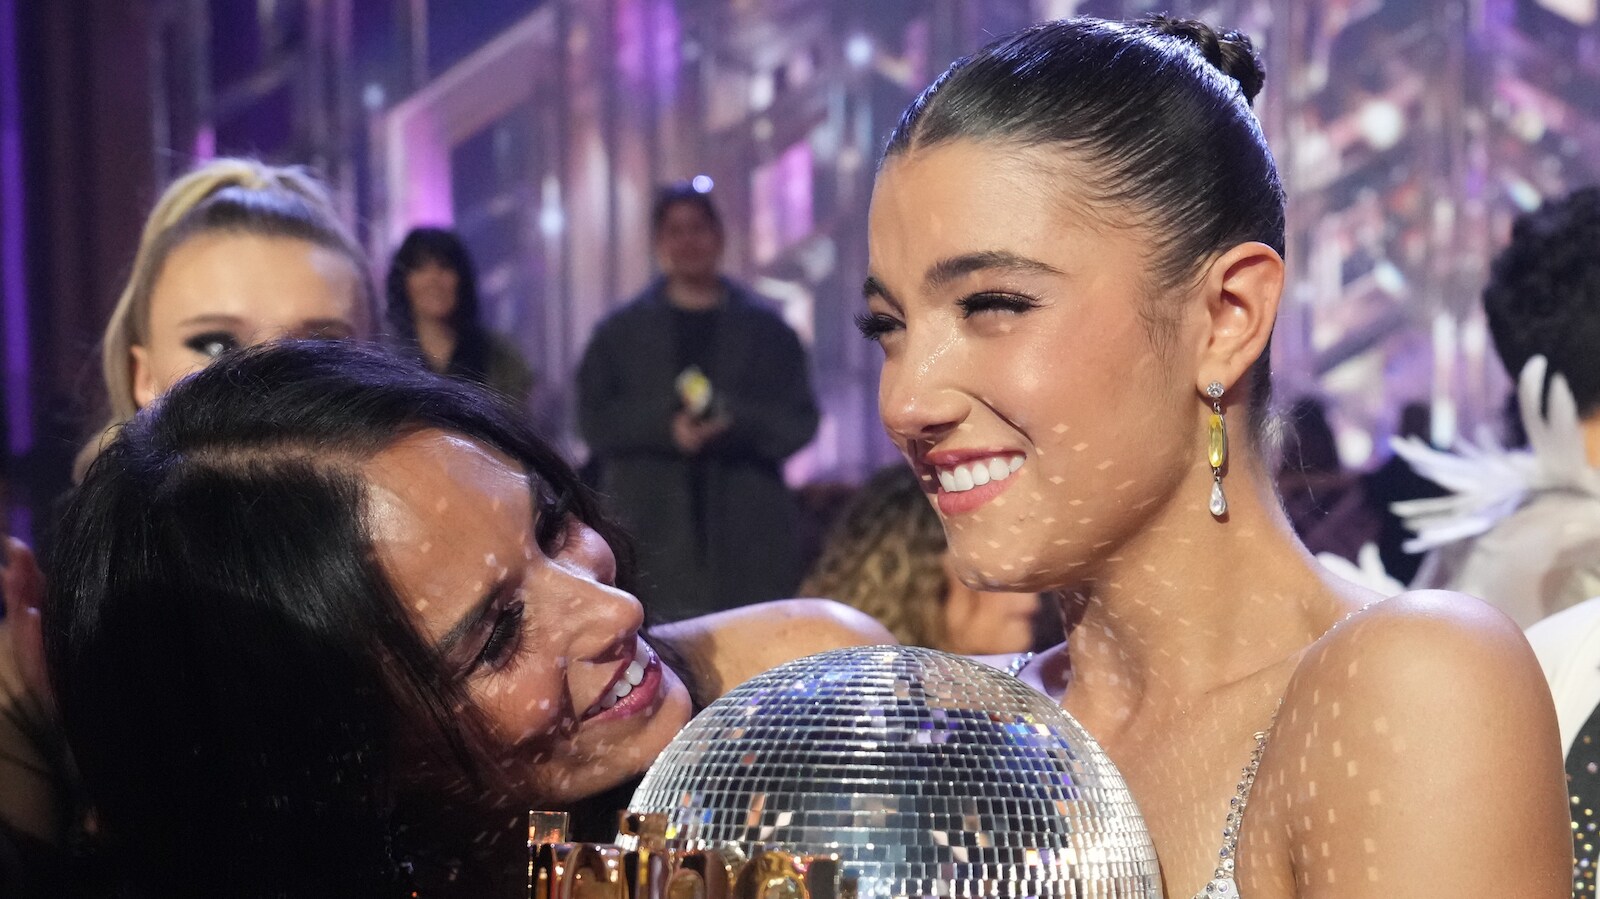 DANCING WITH THE STARS - “Finale” – The four finalists perform their final two routines in hopes of winning the mirrorball trophy. Each couple will perform a redemption dance and an unforgettable freestyle routine. A new episode of “Dancing with the Stars” will stream live MONDAY, NOV. 21 (8:00pm ET / 5:00pm PT), on Disney+. (ABC/Eric McCandless) HEIDI D’AMELIO, CHARLI D’AMELIO